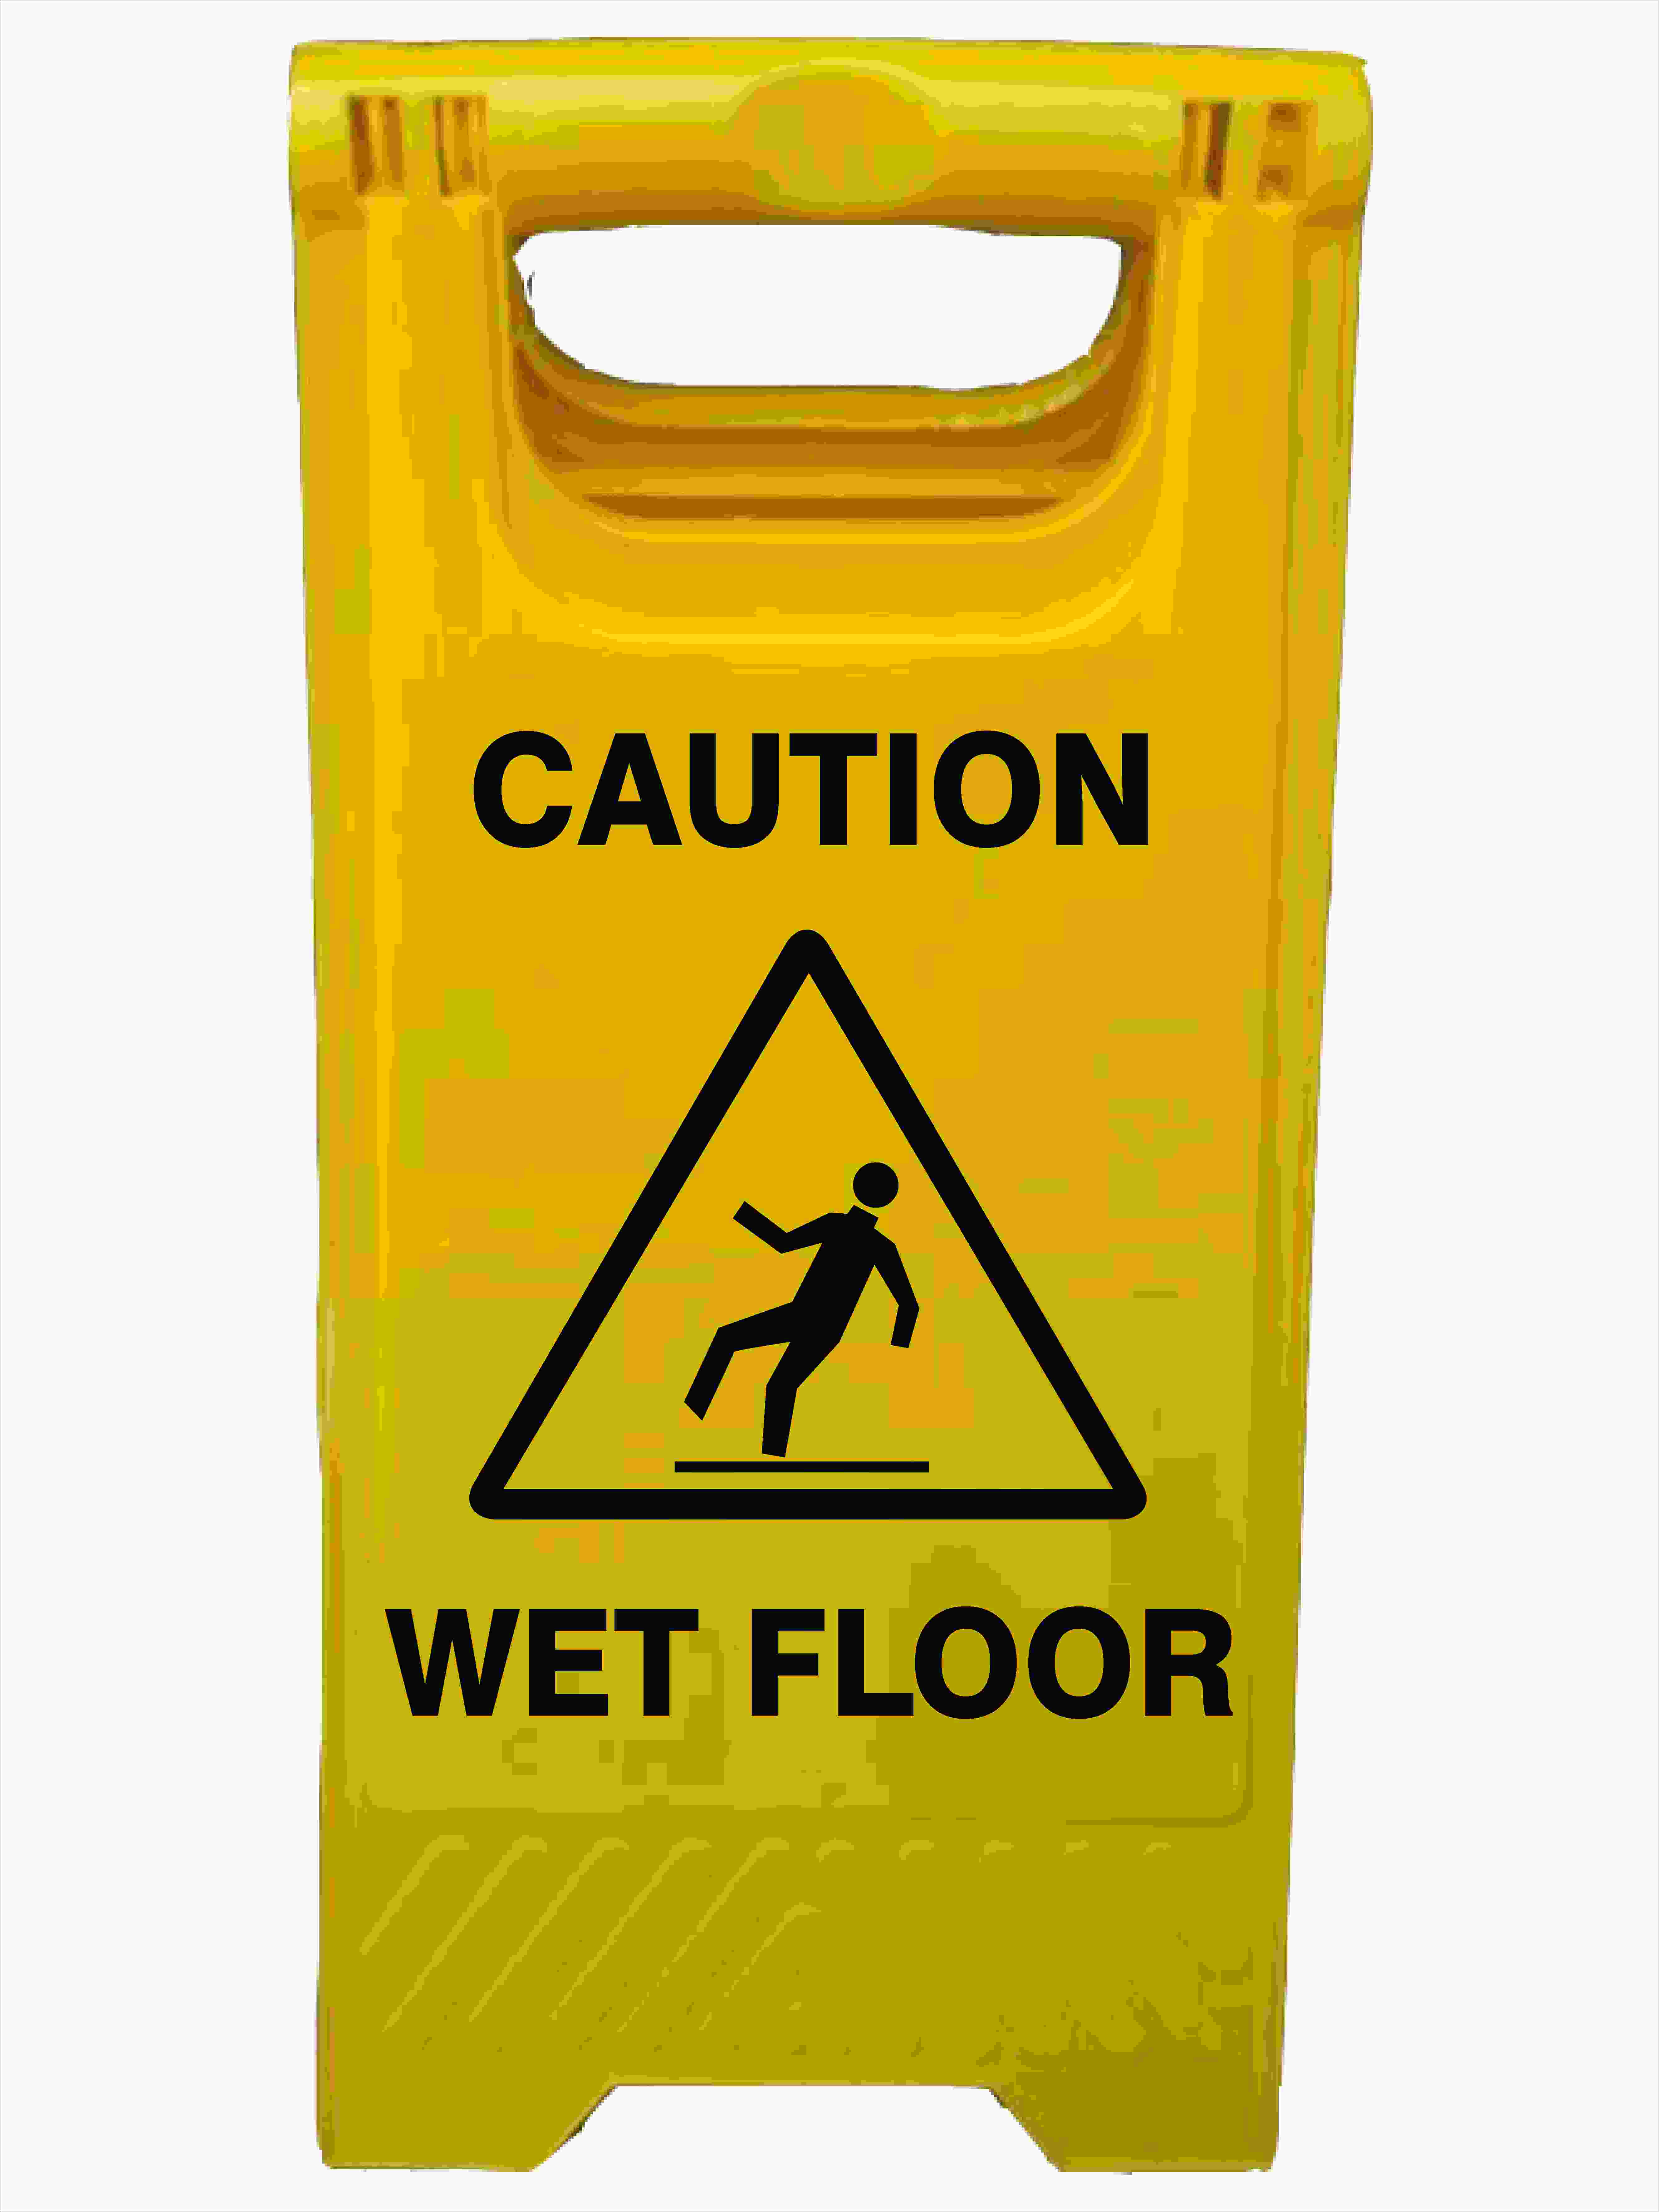 caution-wet-floor-discount-safety-signs-new-zealand